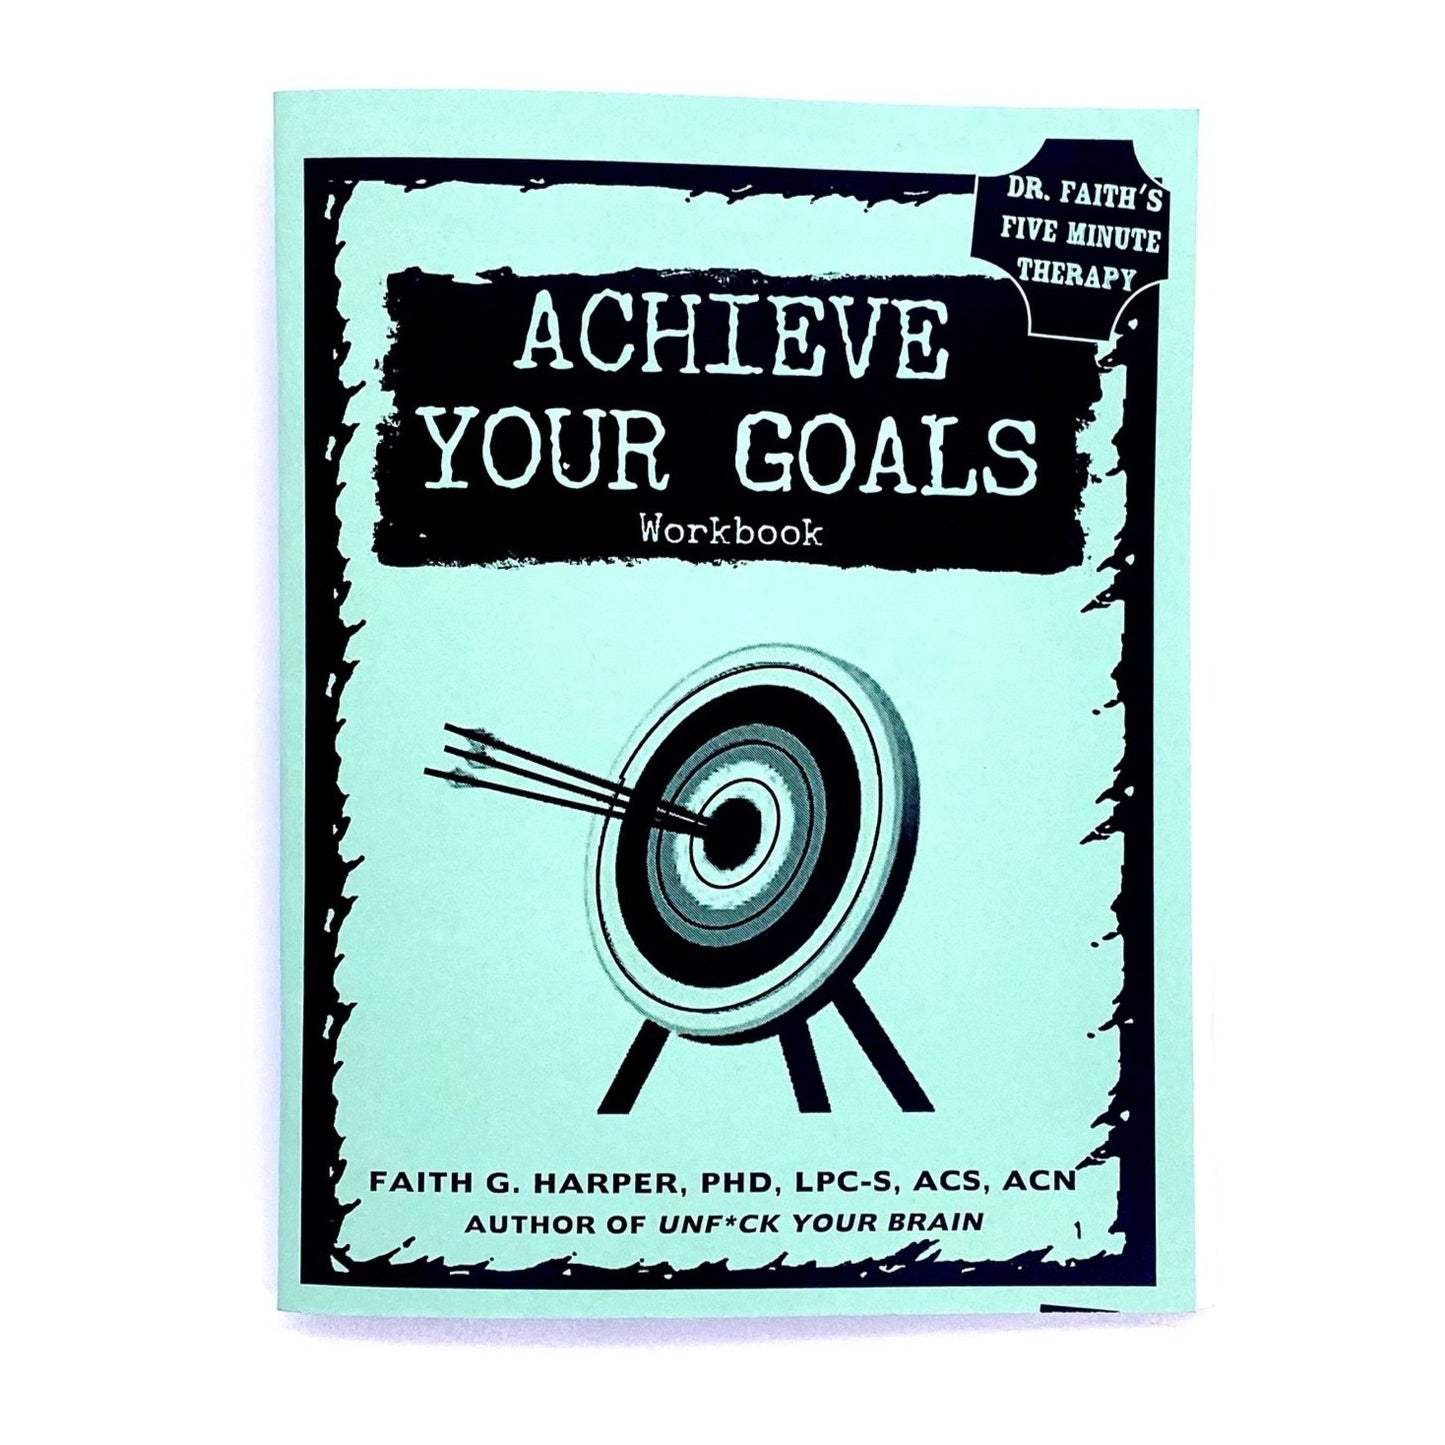 Cover of Achieve Your Goals workbook by Faith G Harper.